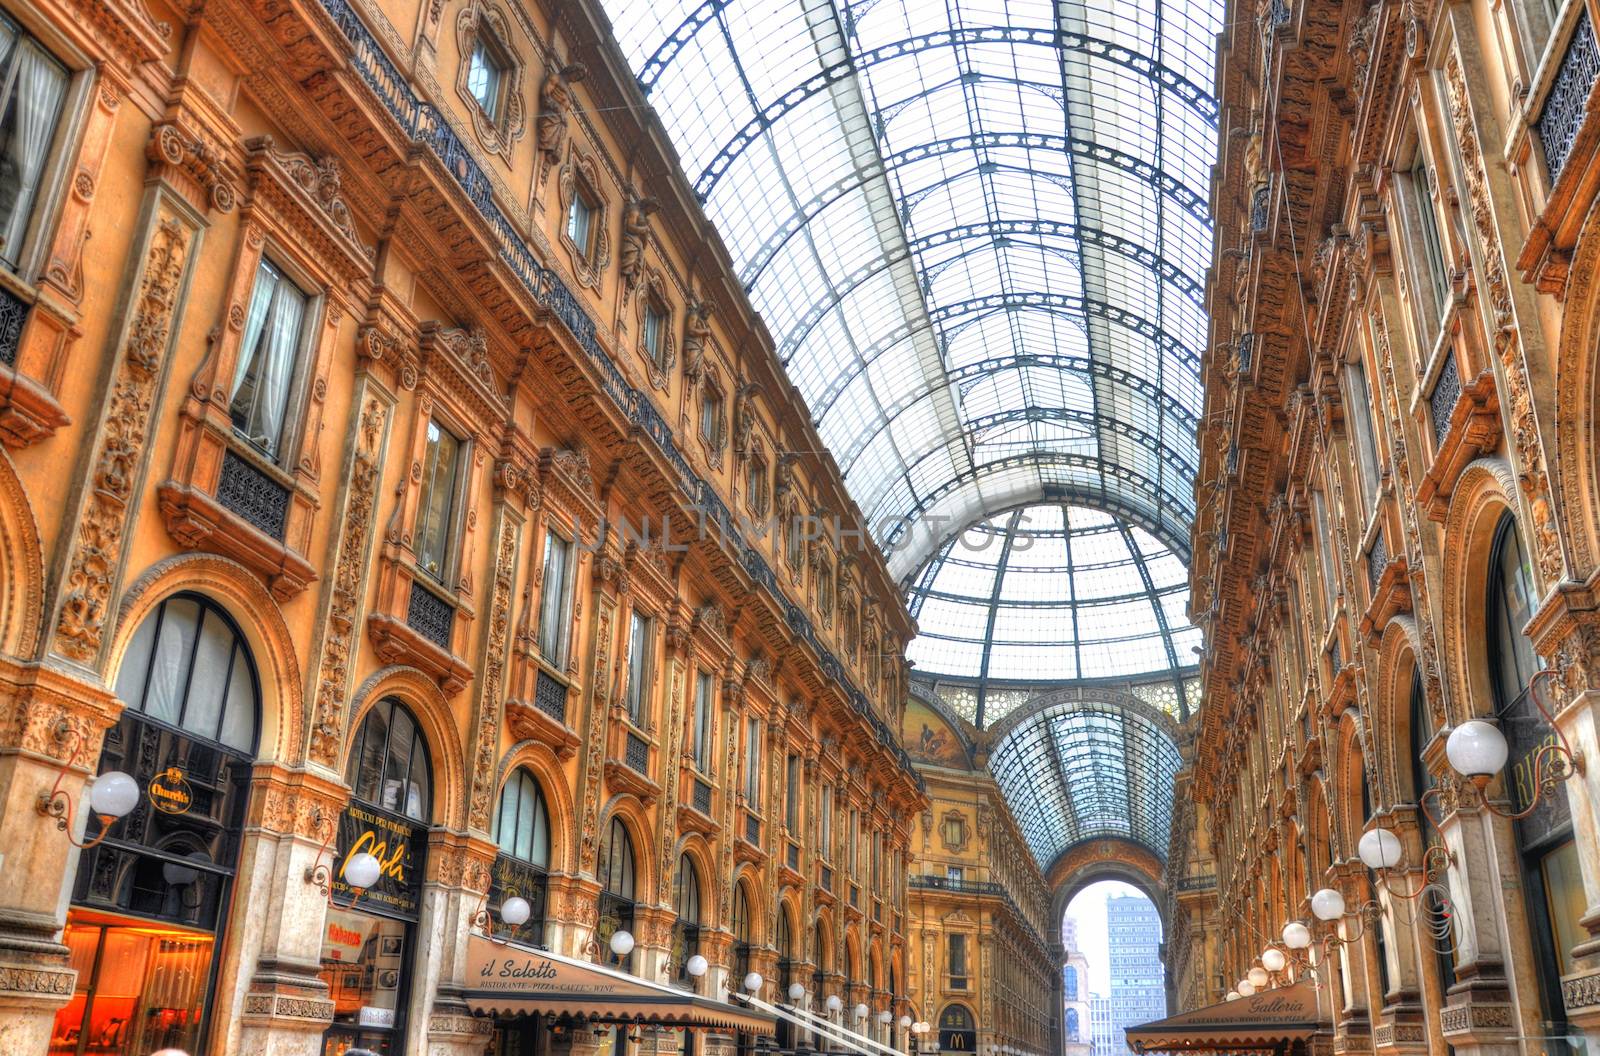 Vittorio Emanuele gallery, Venice, Italy (HDR) by Eagle2308